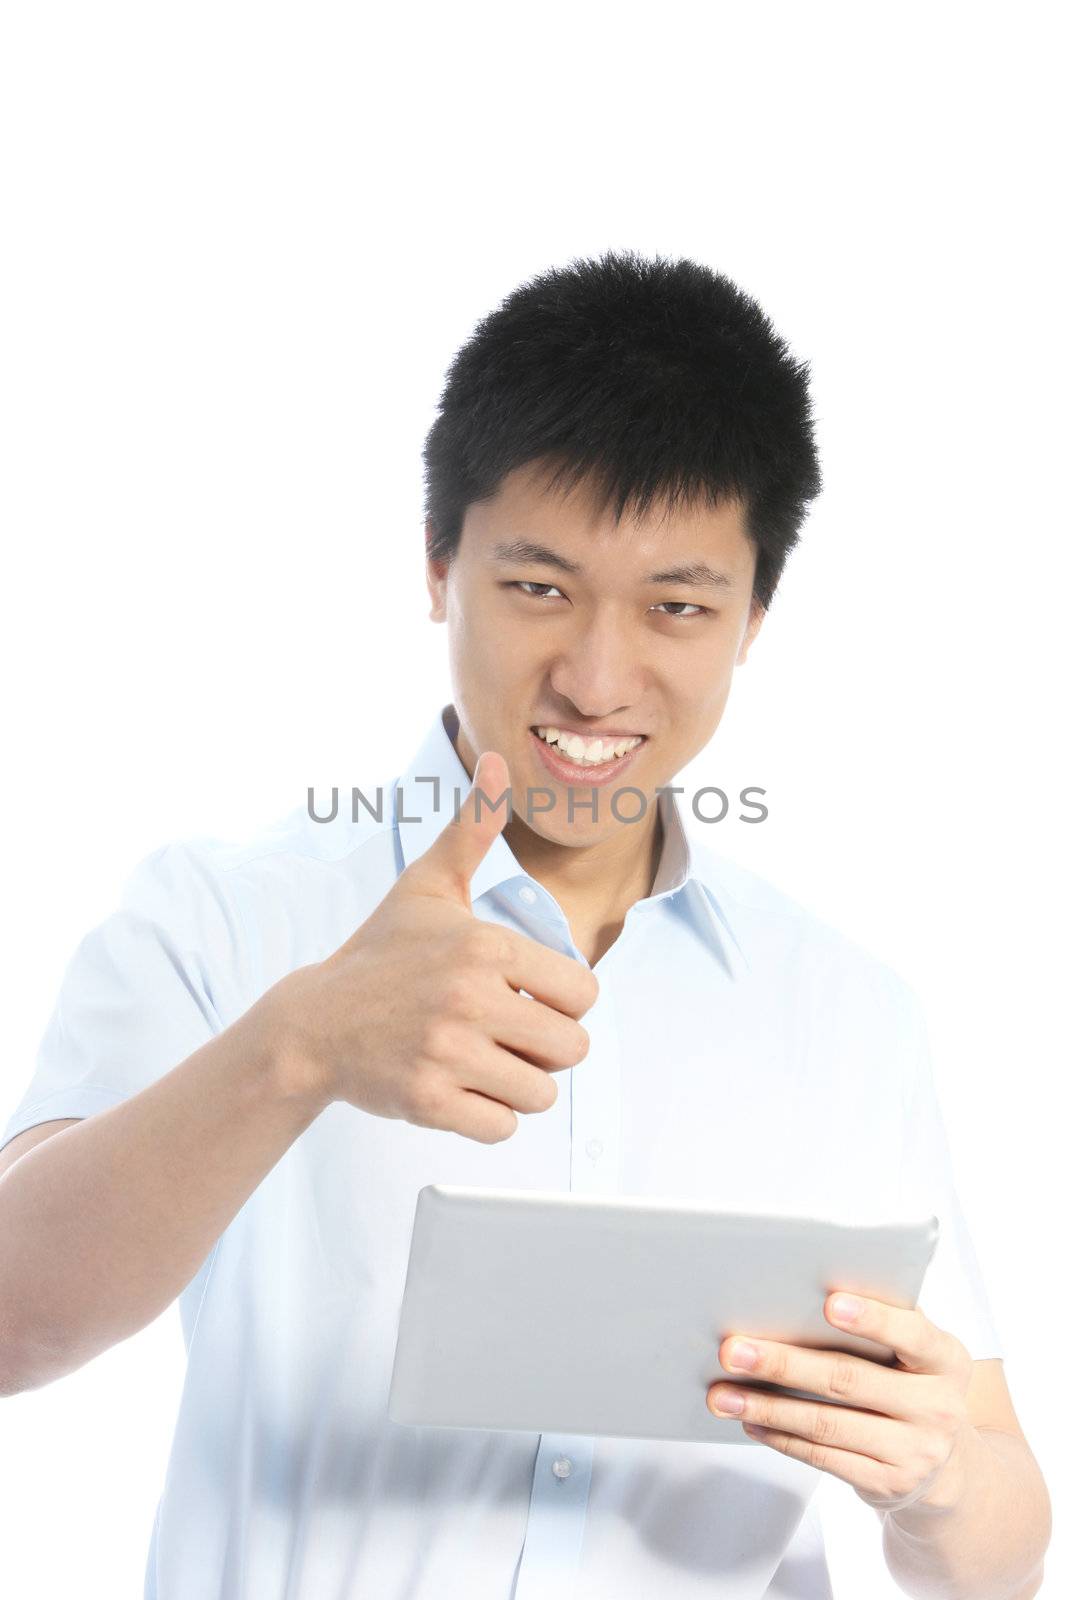 Smiling Asian man giving a thumbs up by Farina6000